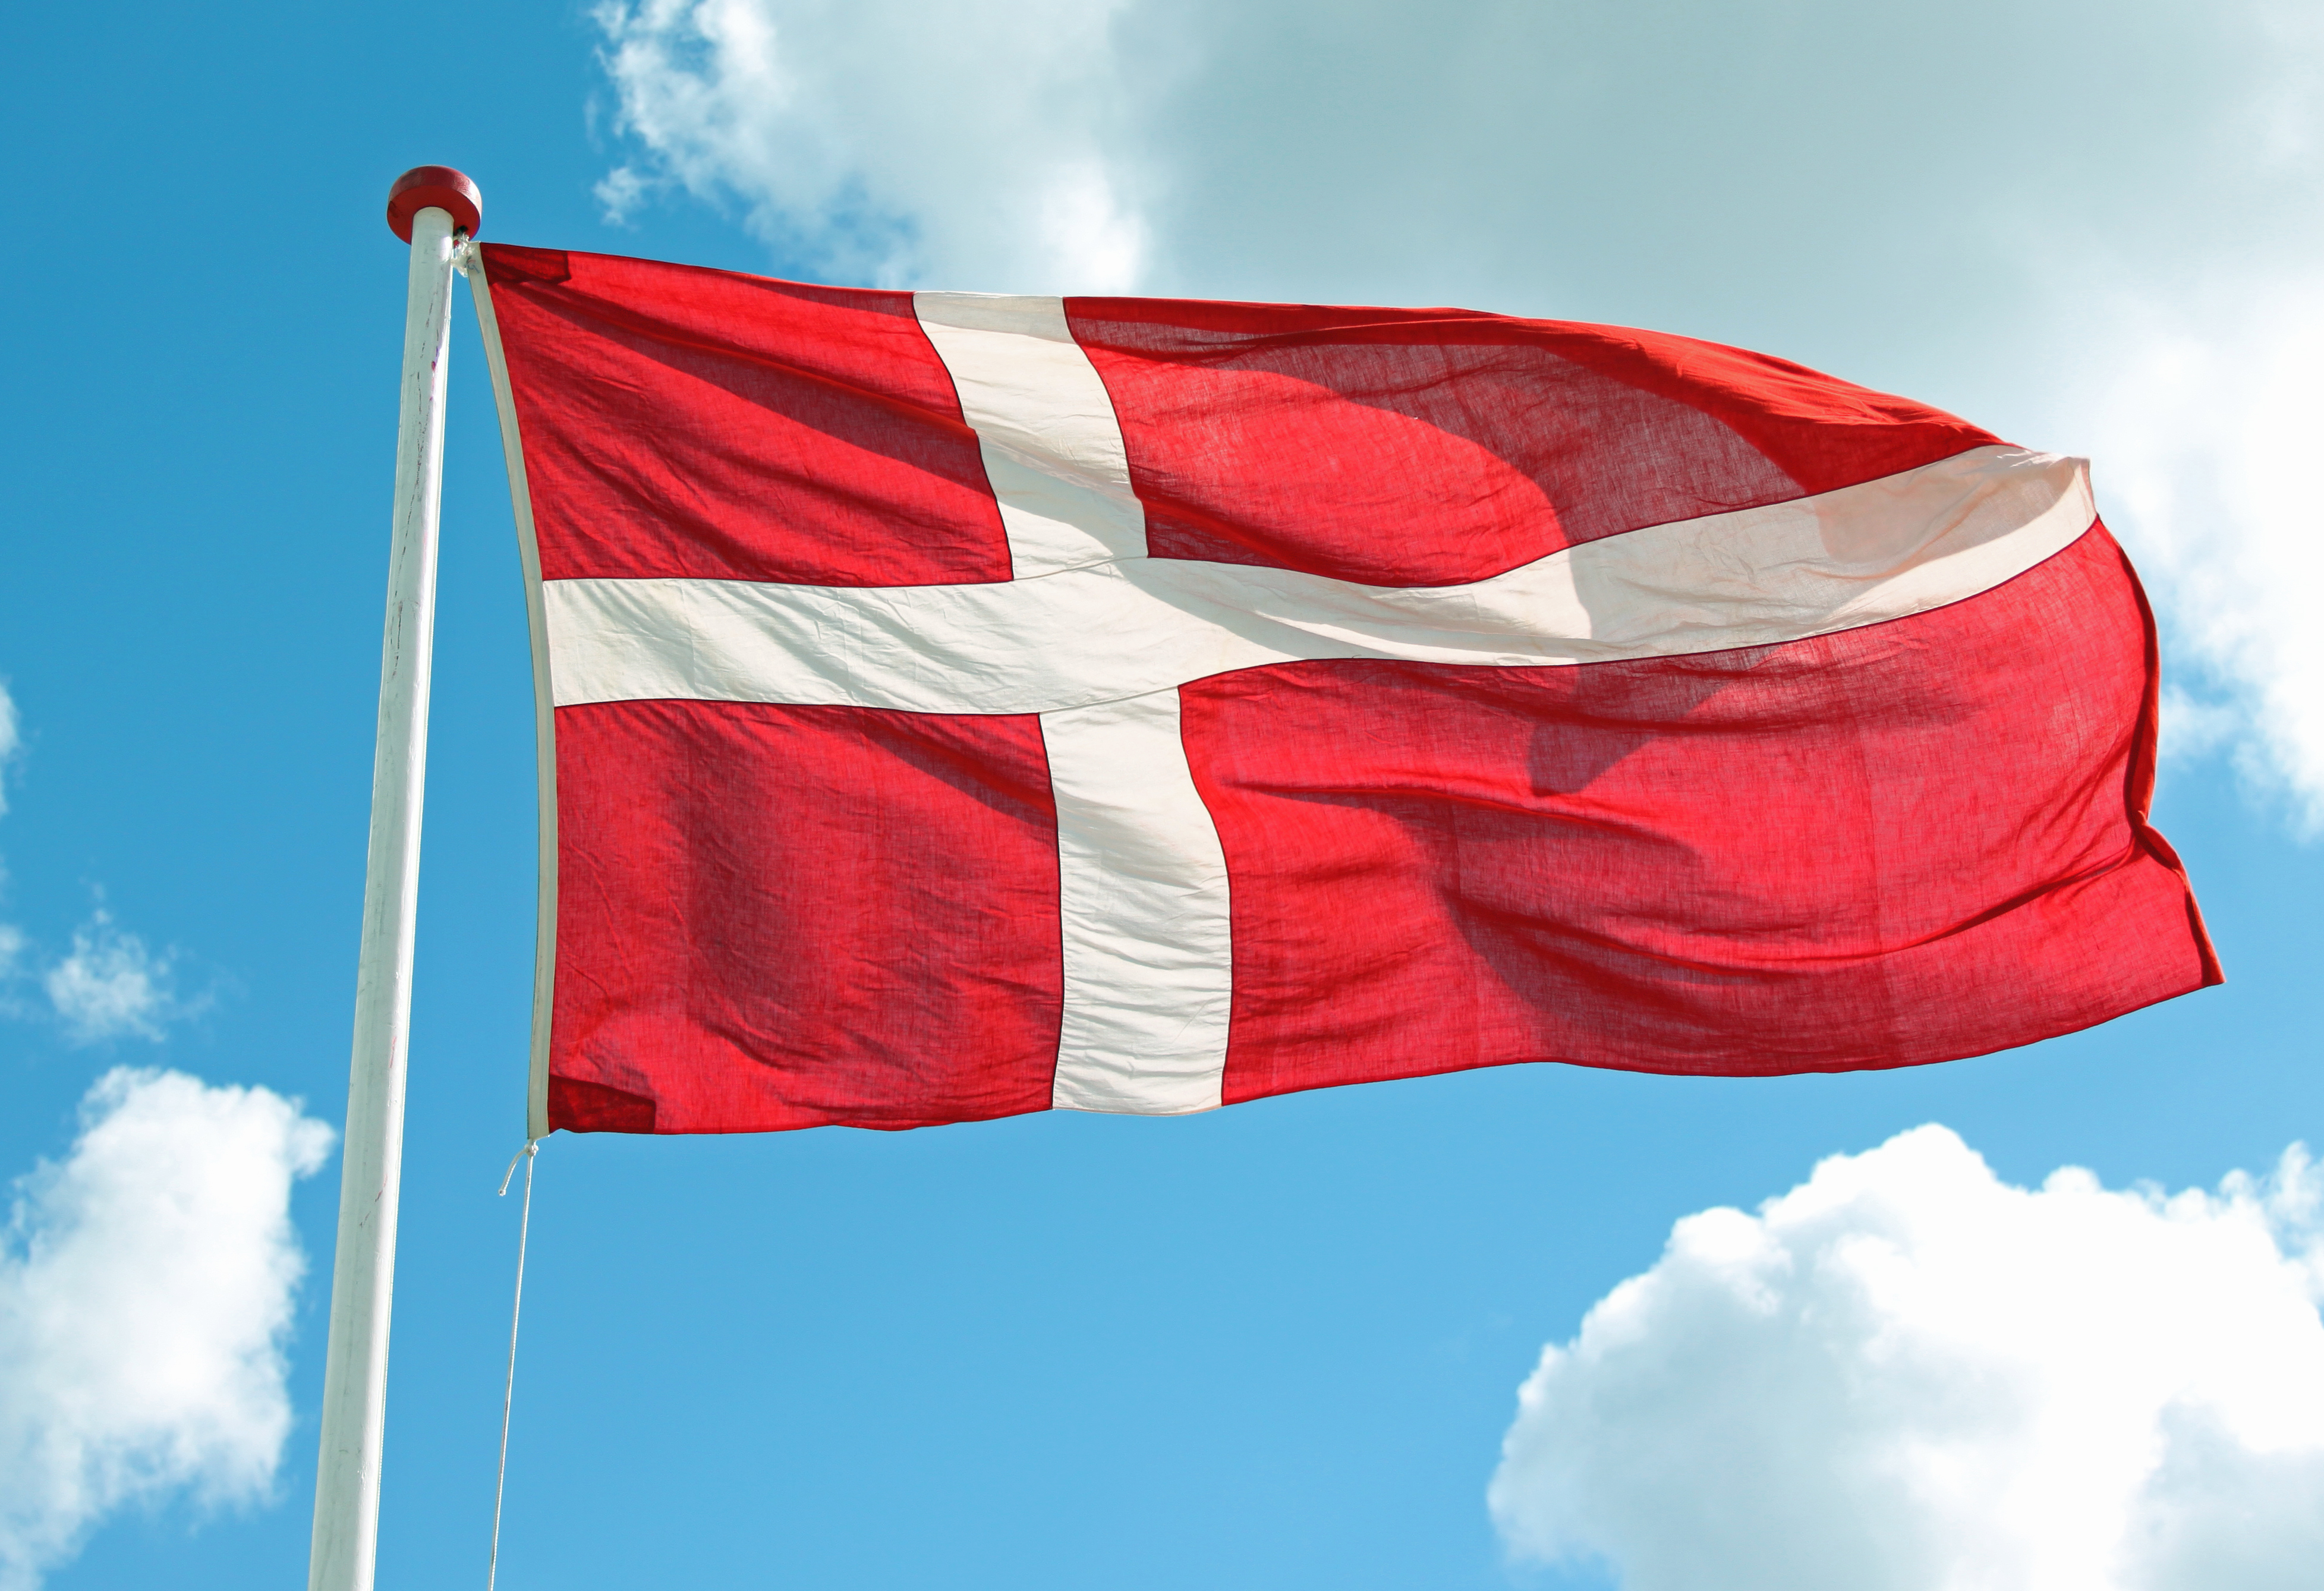 The Danish flag, Dannebrog, coloured red and white waving in the air